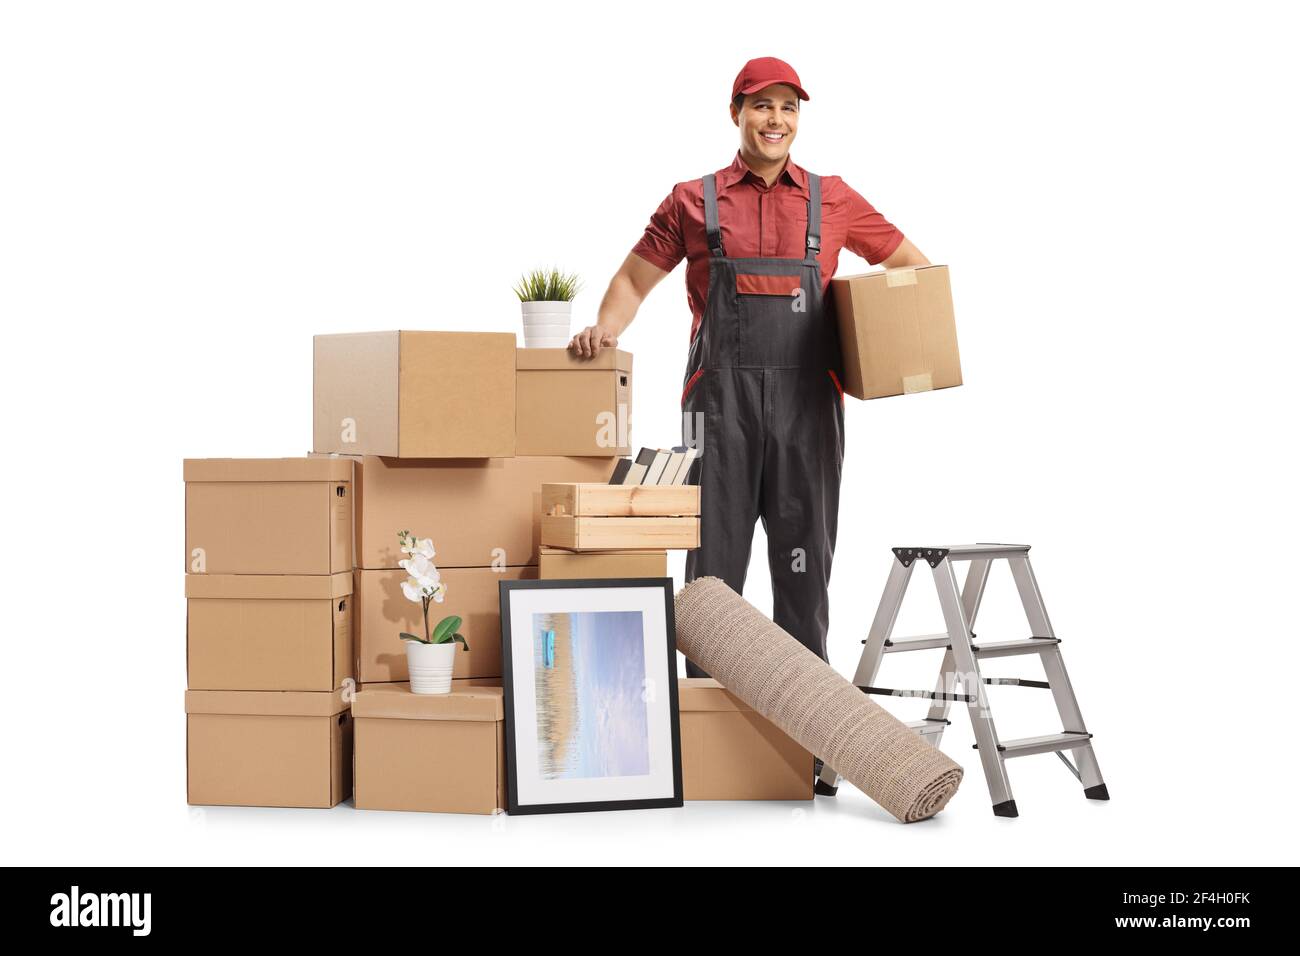 Professional mover posing with a pile of packed cardboard boxes ready for removal isolated on white background Stock Photo